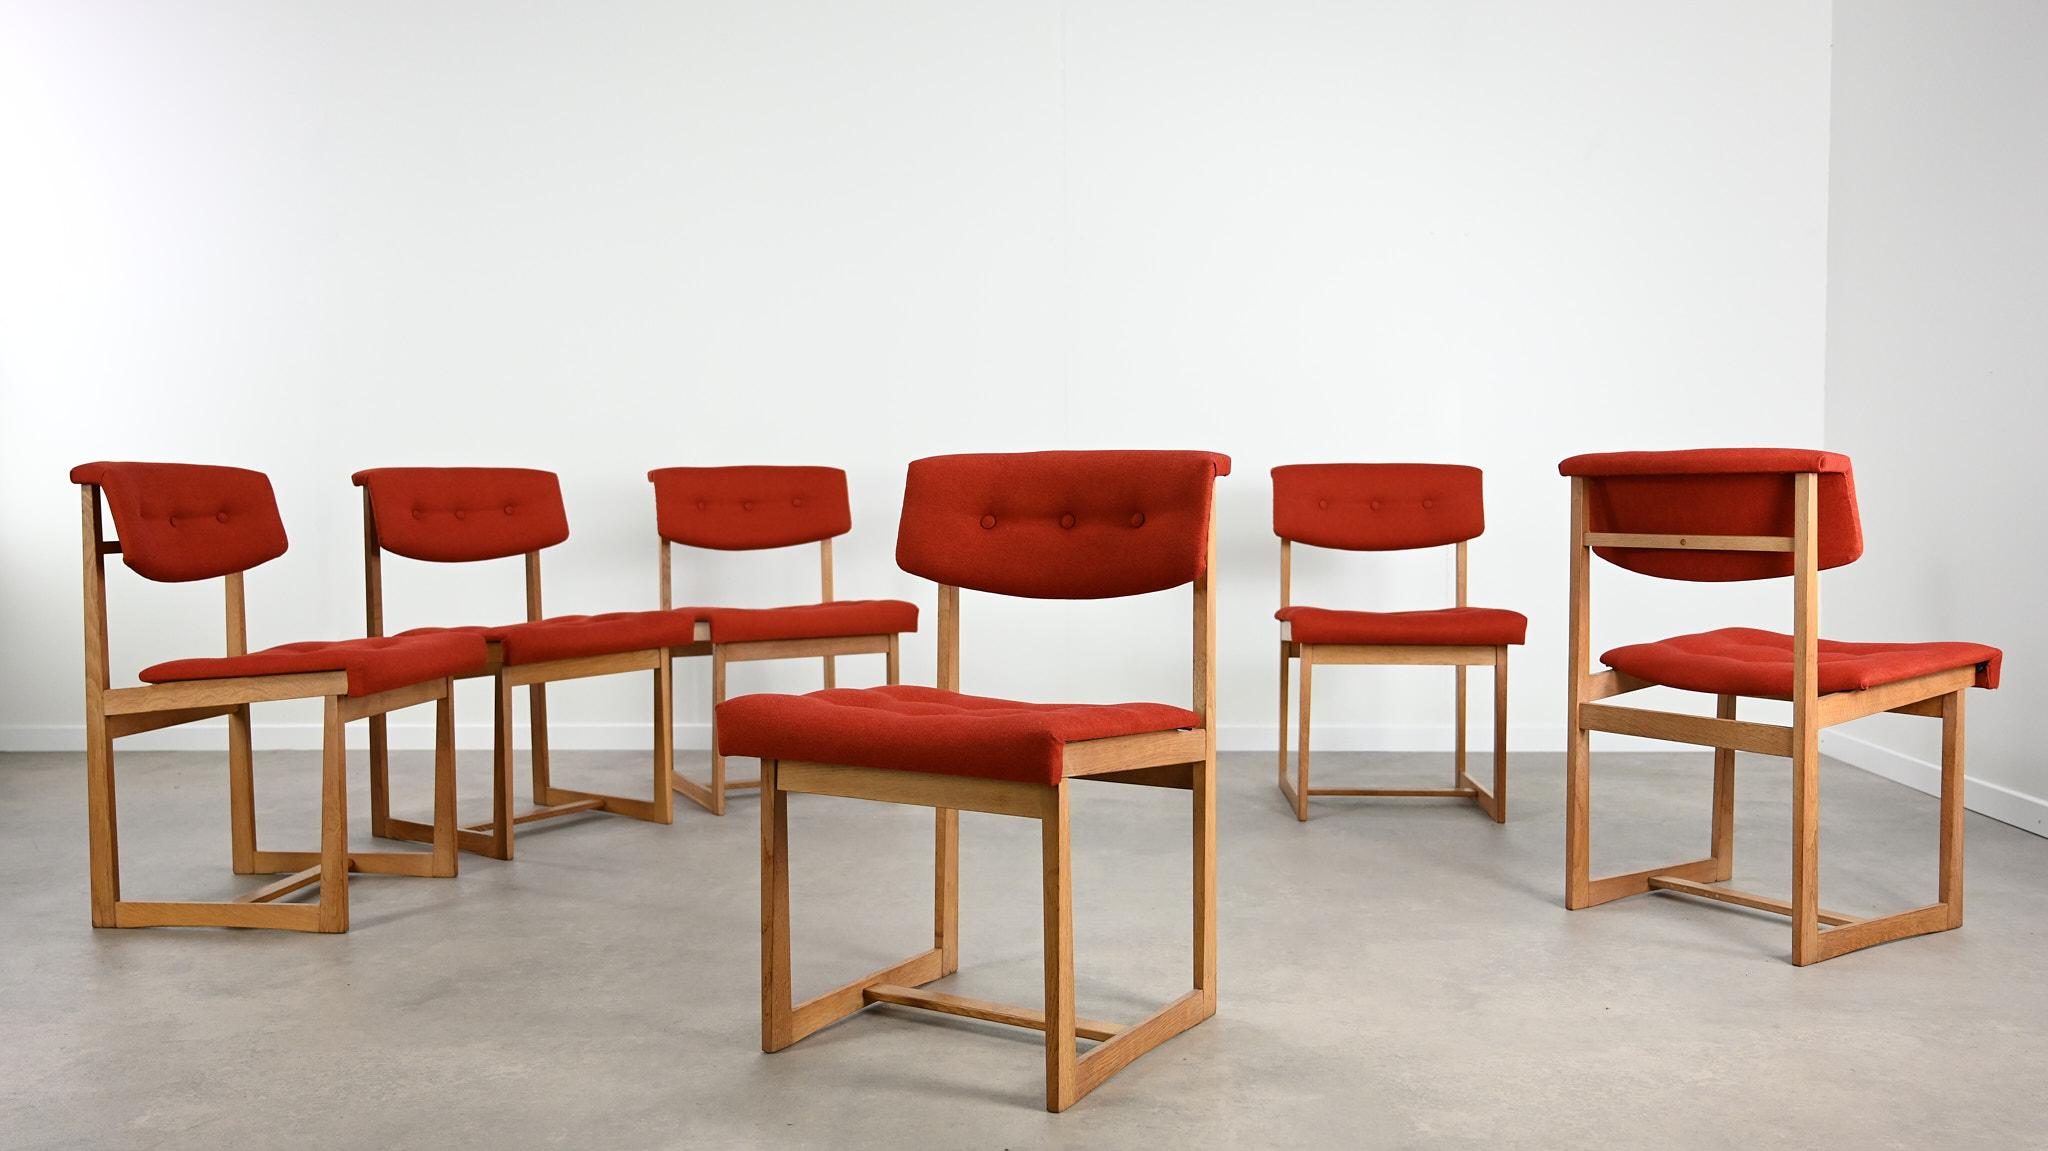 Rare set of 6 chairs, by danish designer Henning Sørensen for Hos Dan-Ex. Back rest and seat pad upholstered in red coral fabric, structures in solid oak. small traces of use and light patina of time on the structures, very good overall condition.